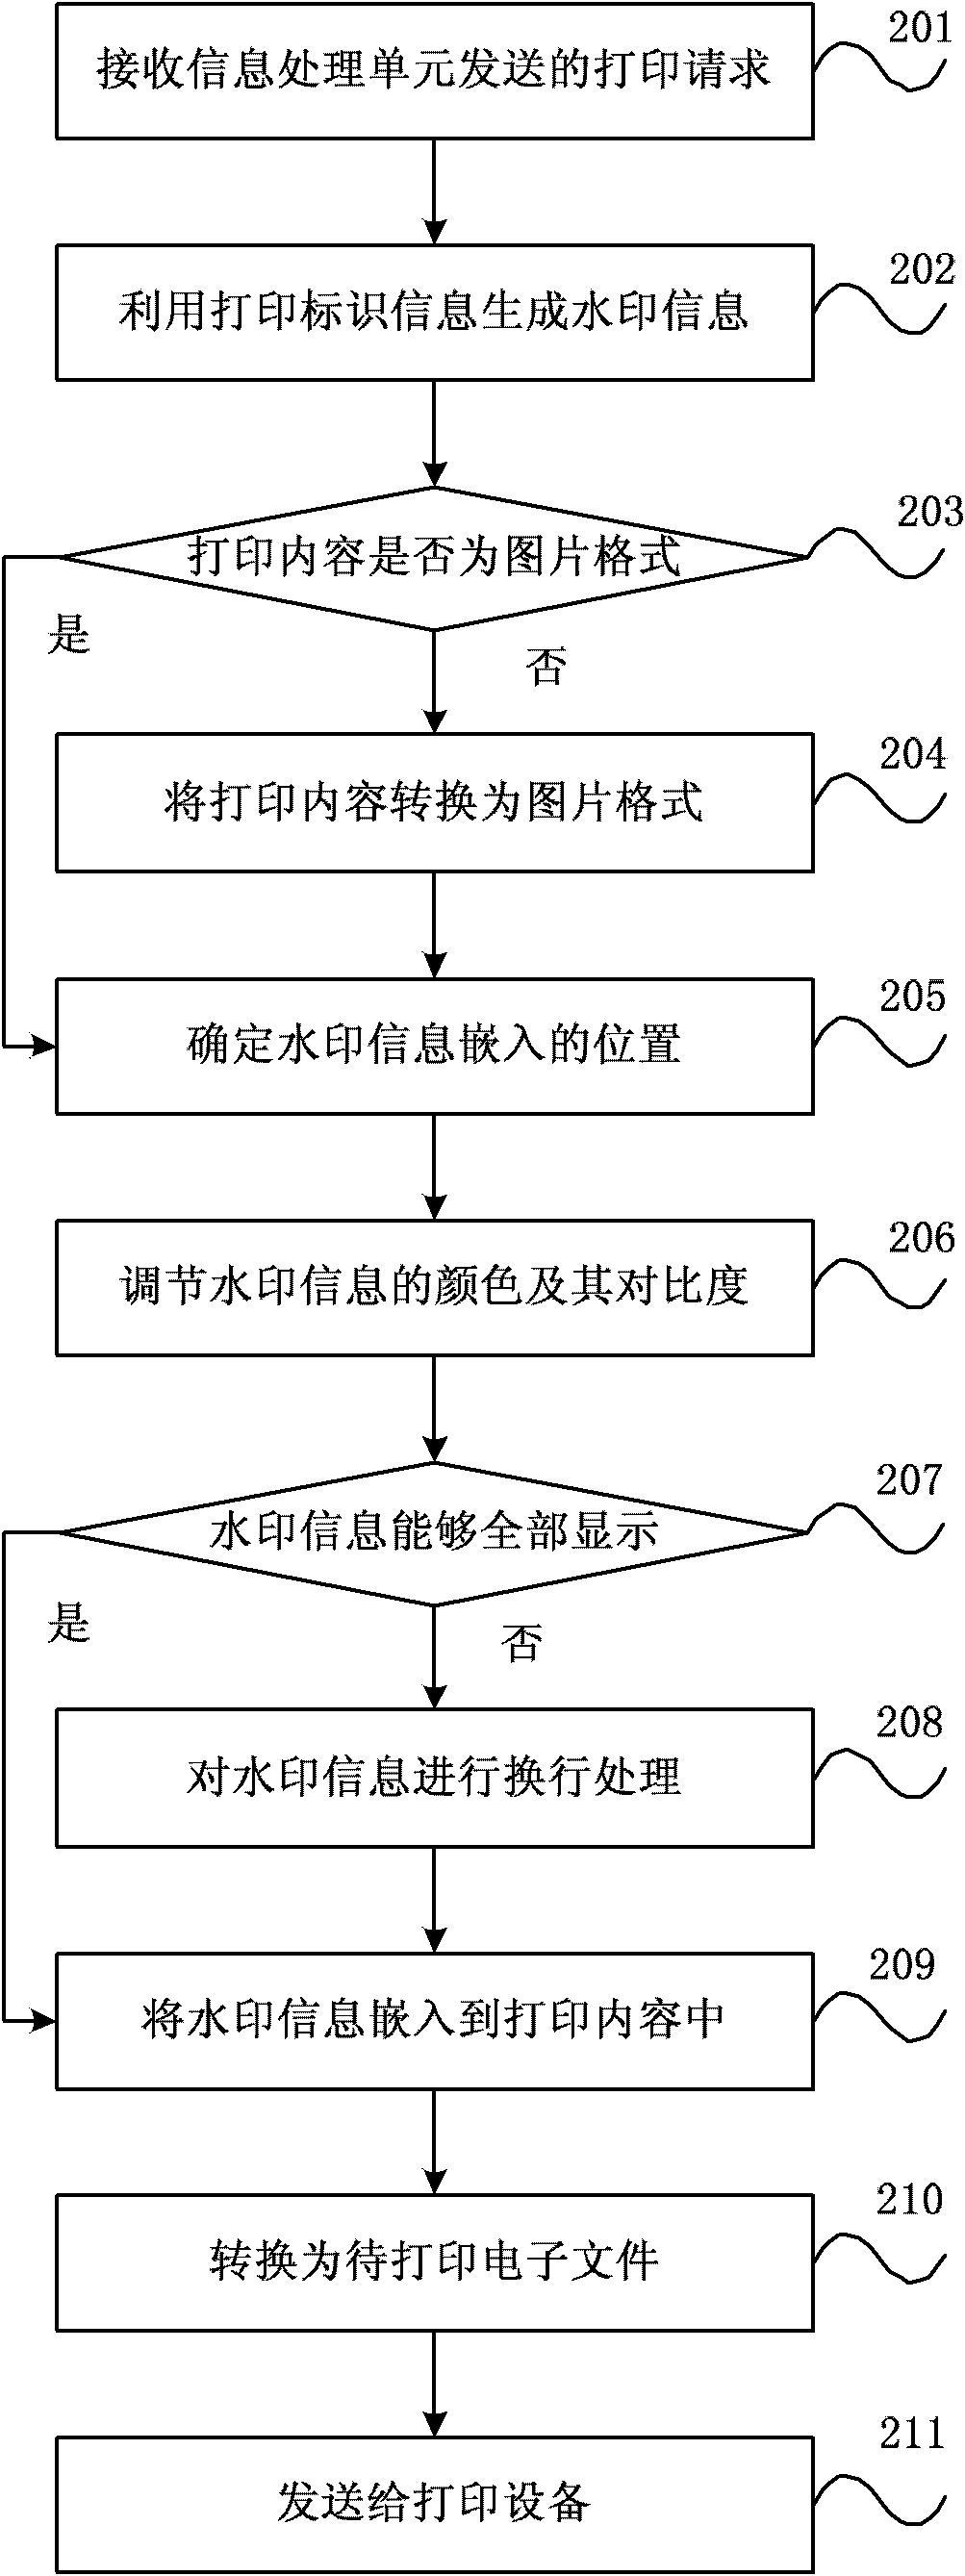 Method and device of embedding watermark information into printing content